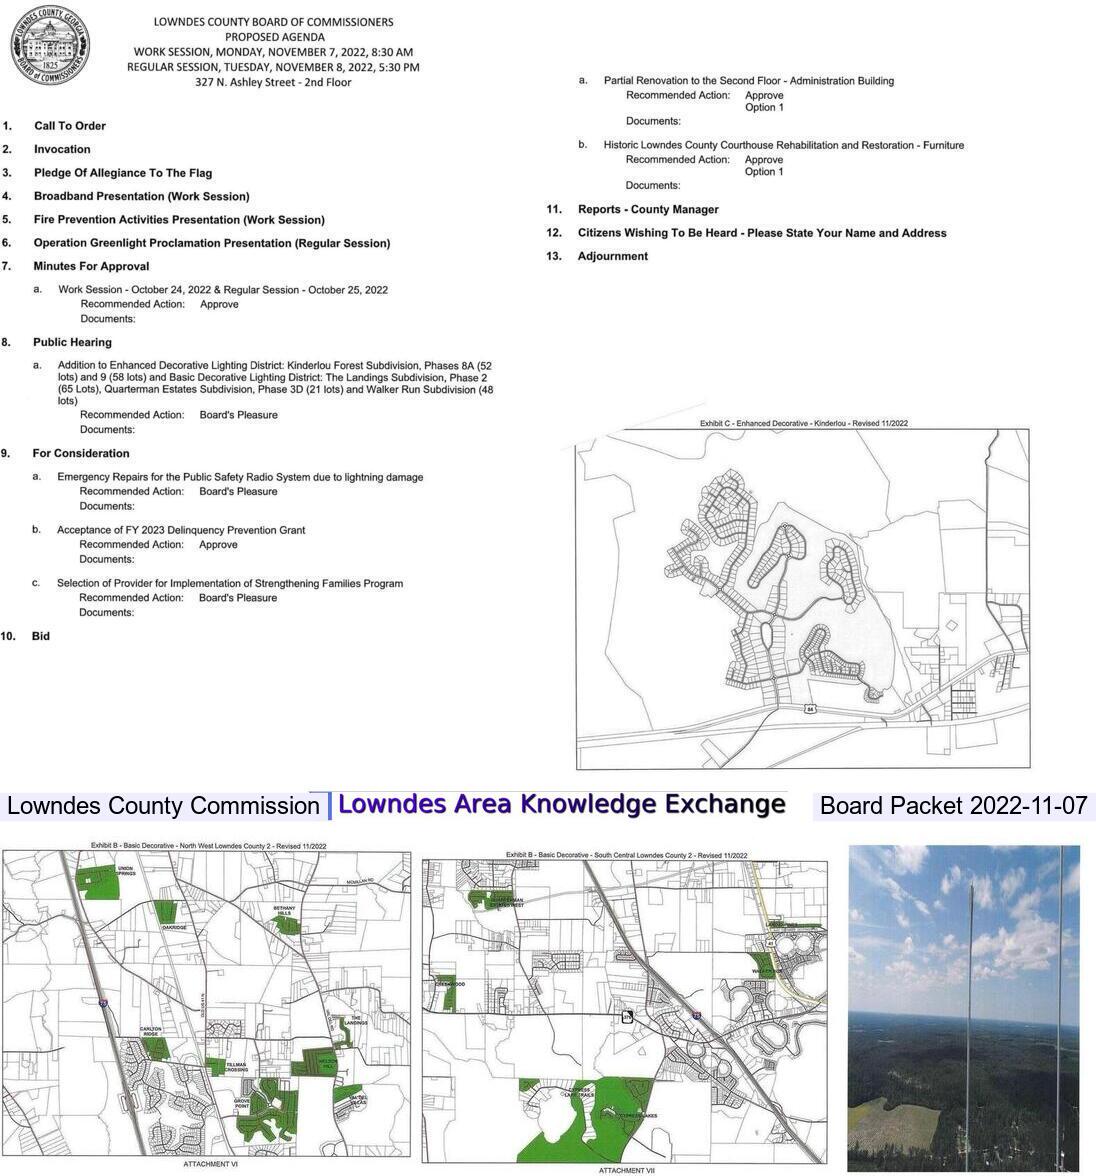 [Collage @ LCC Packet 2022-11-07]